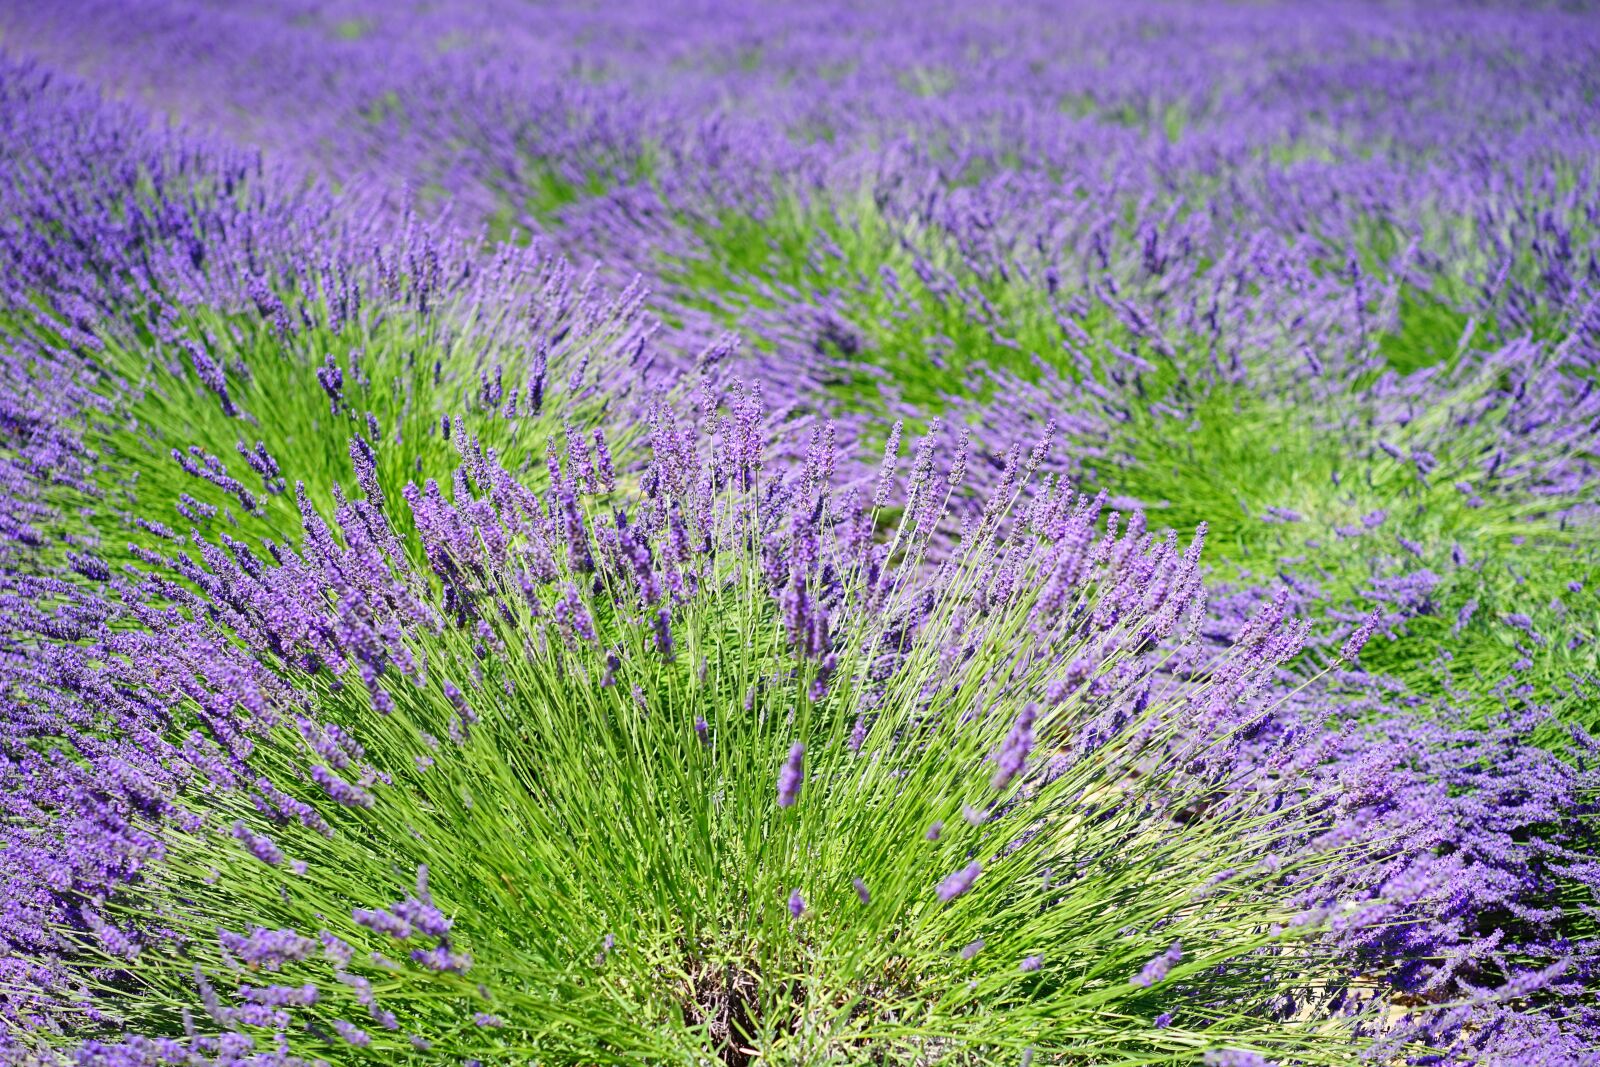 Sony a7 sample photo. Lavender, lavender field, lavender photography